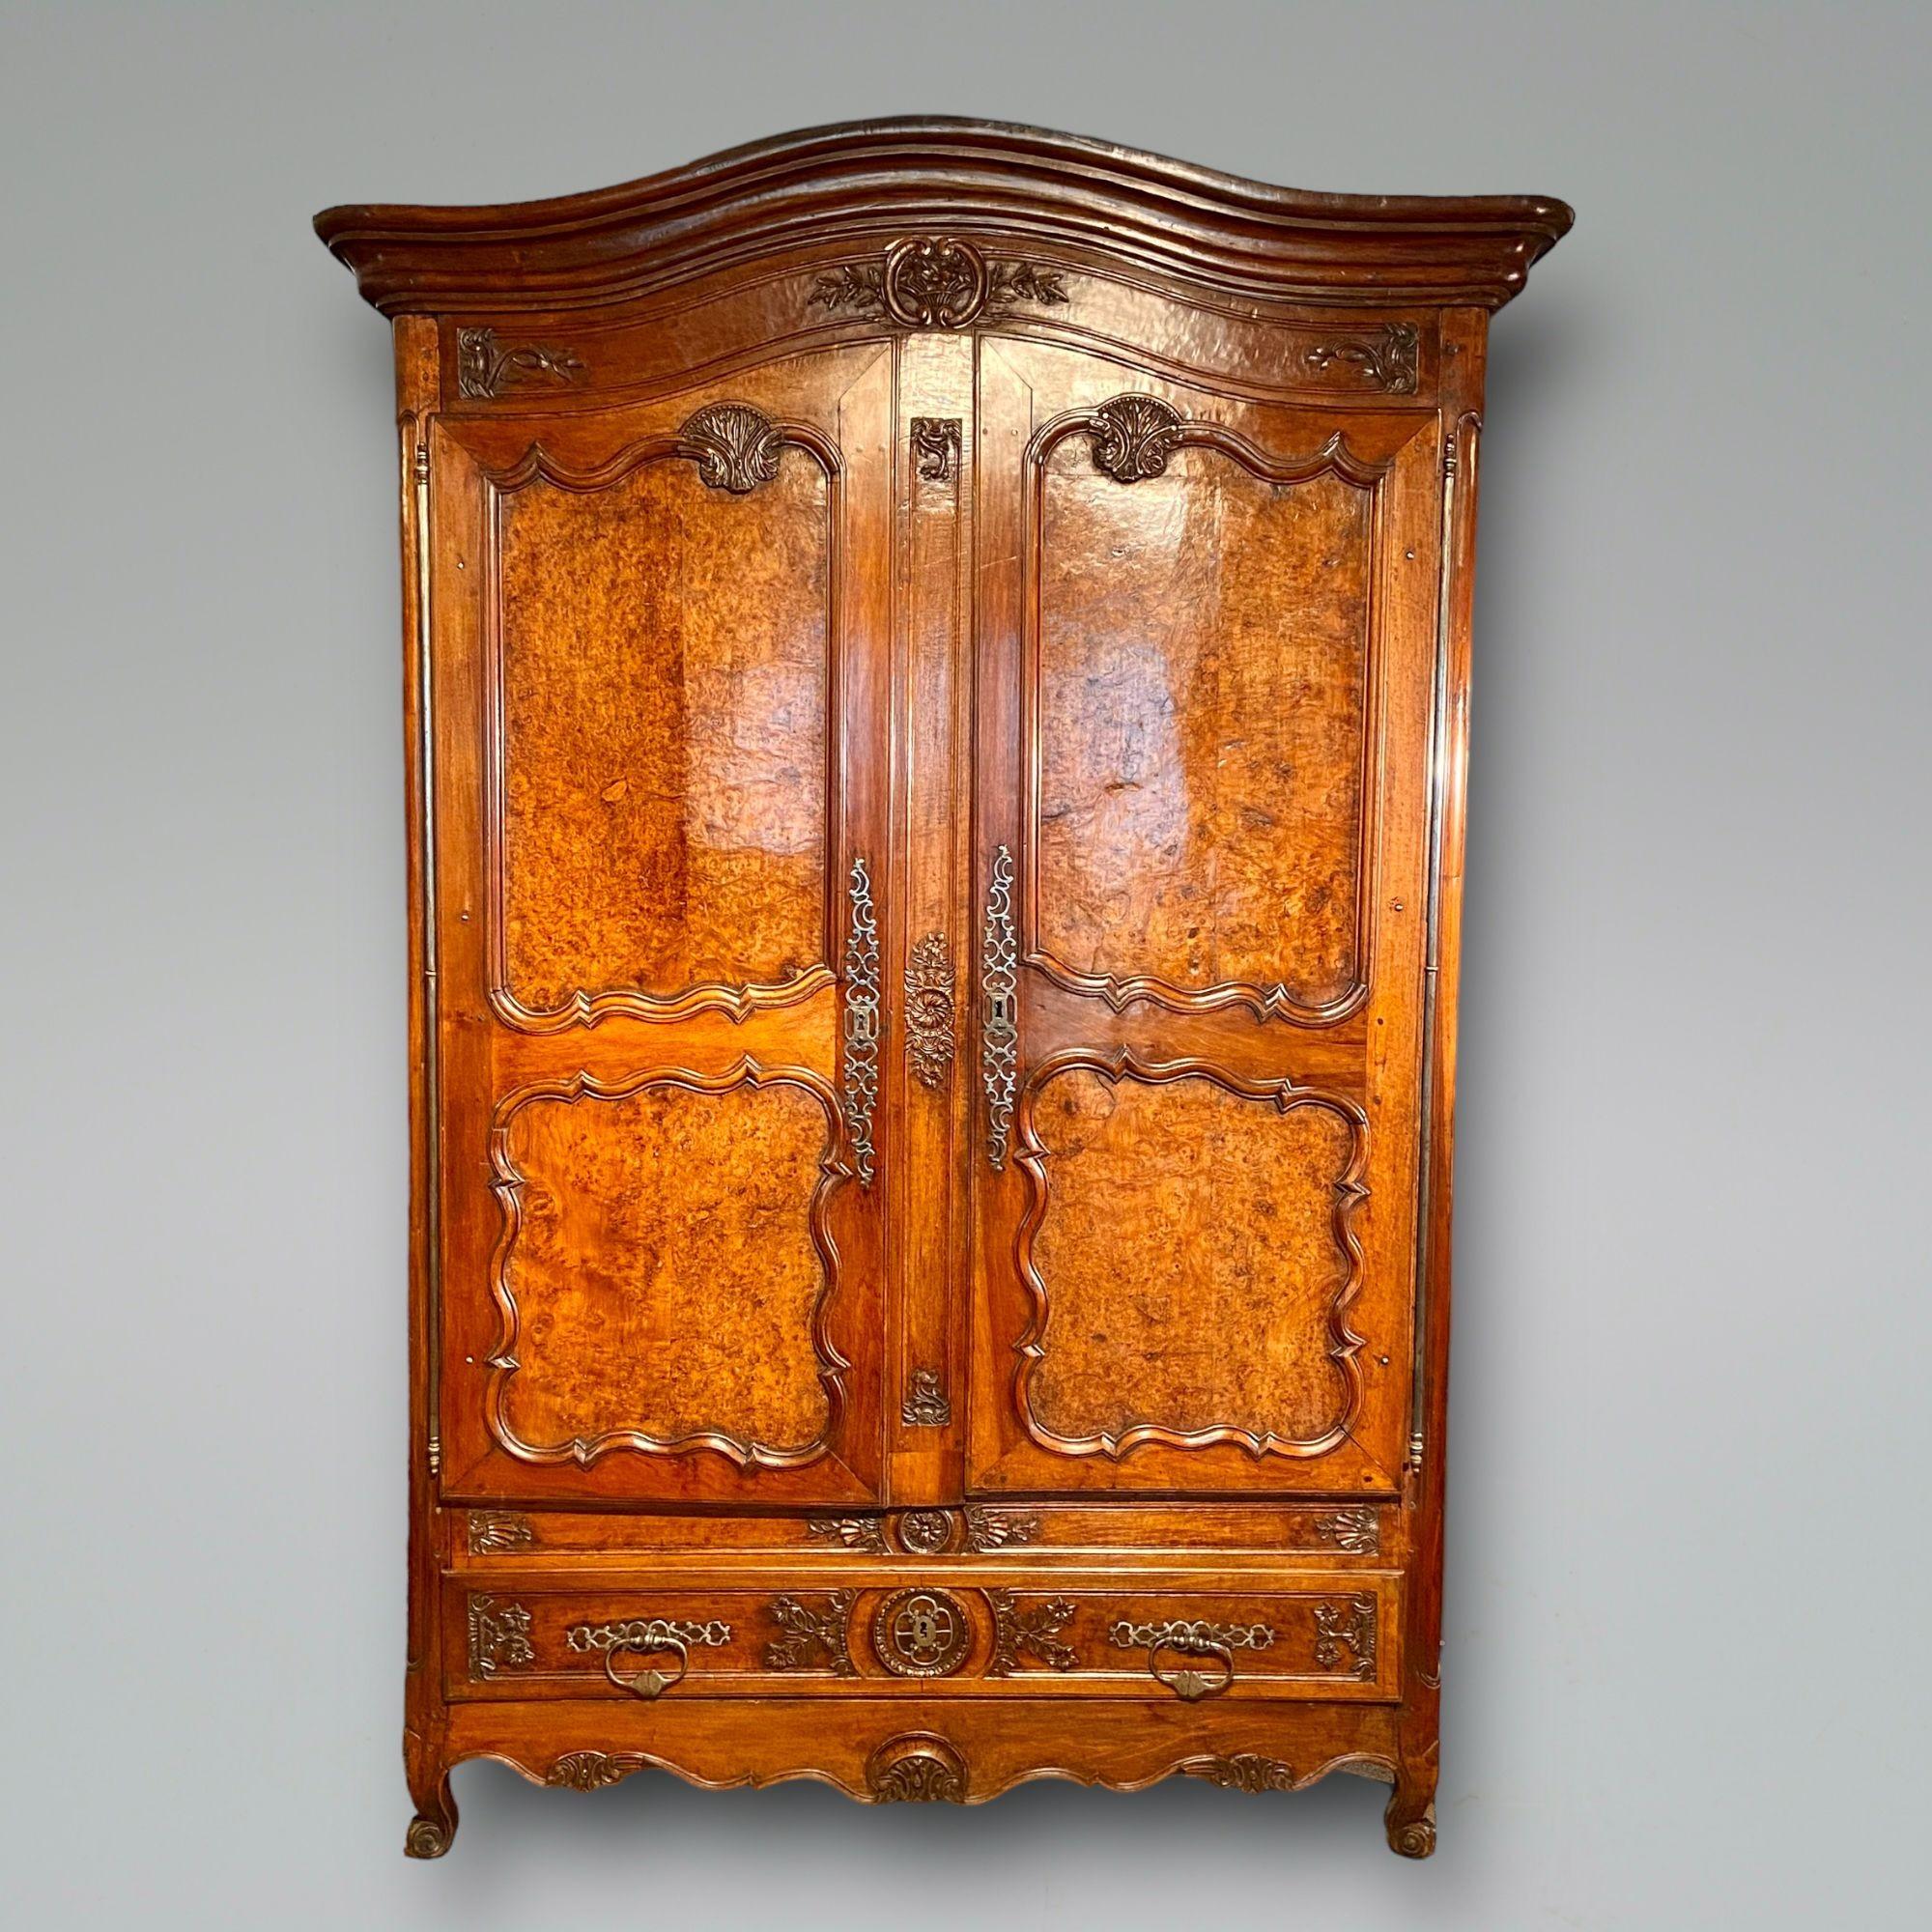 A fine walnut armoire with super original metal work, the panels in the doors with the unusual feature of having beautiful burr walnut. Great colour and patiation
Possible Lyon region circa 1790.